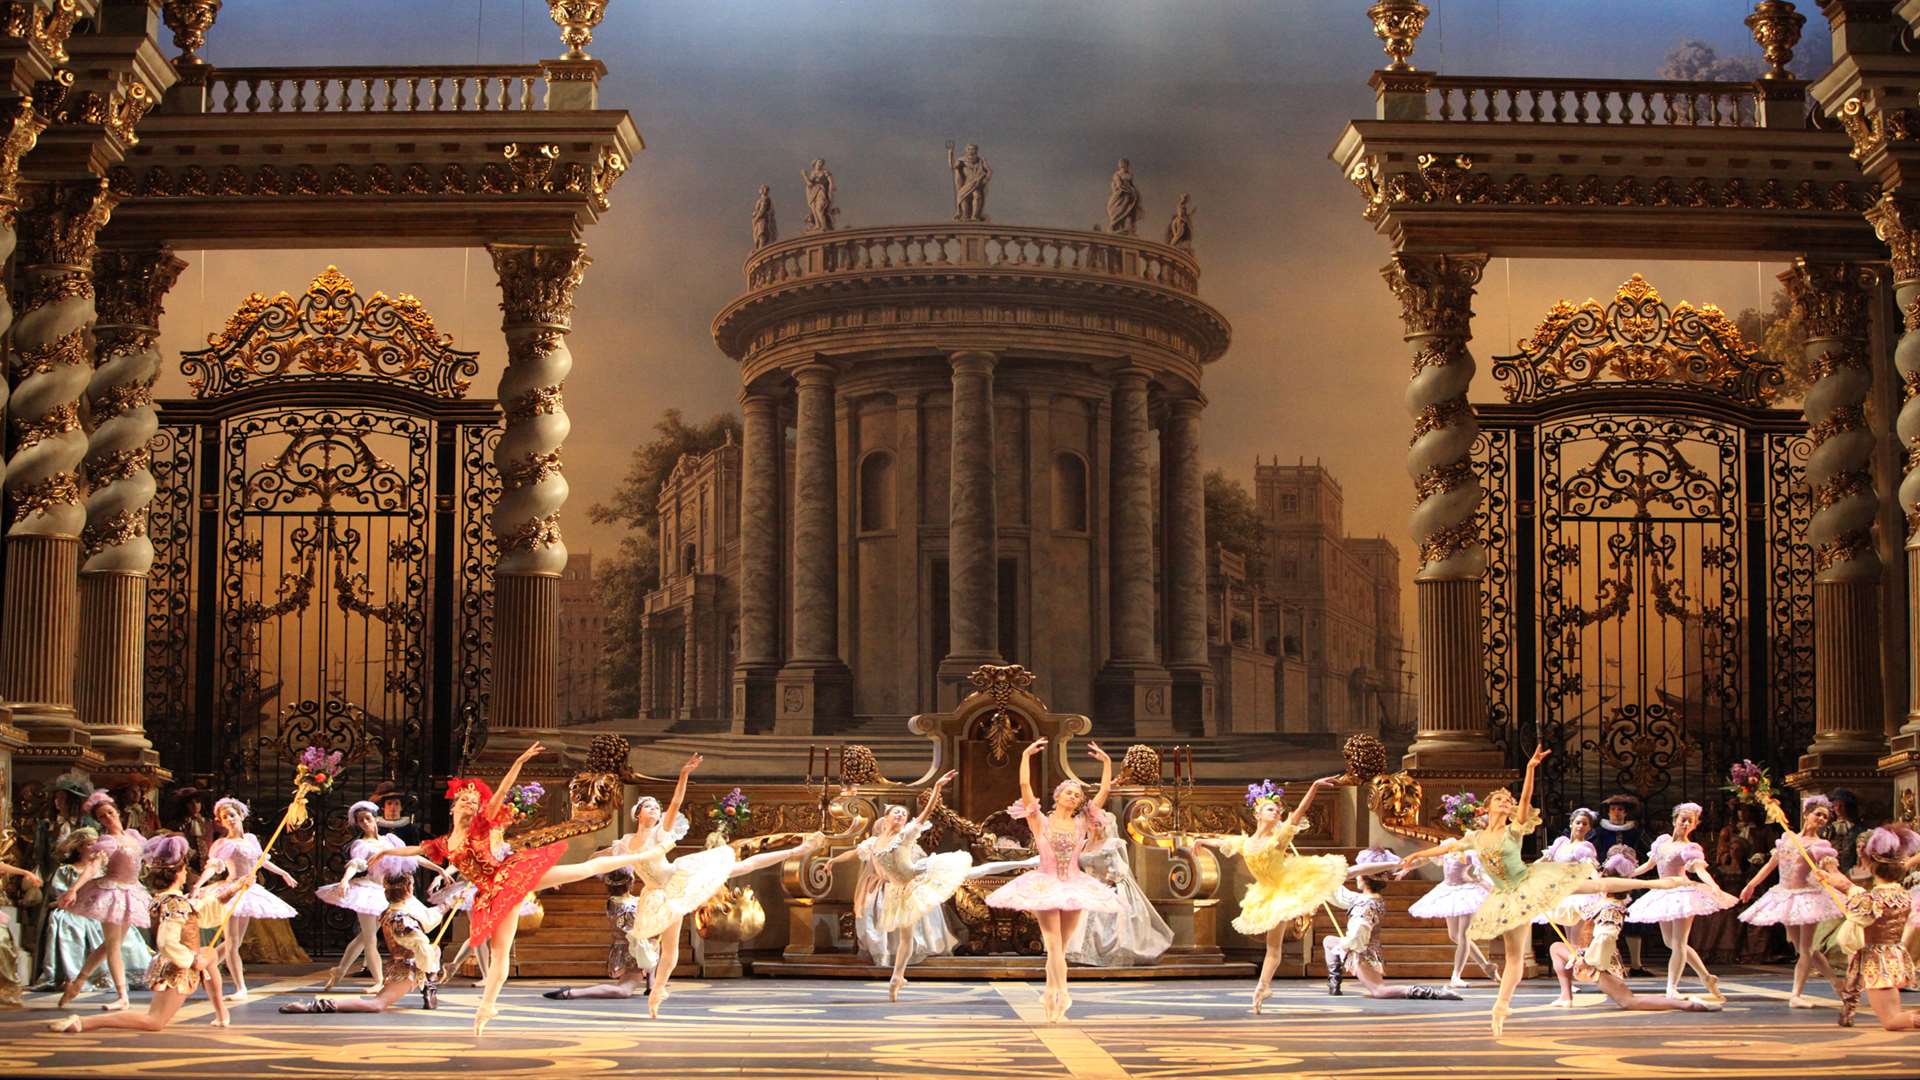 Sit back and relax at the Showcase Cinema in Bluewater and watch the Bolshoi Ballet